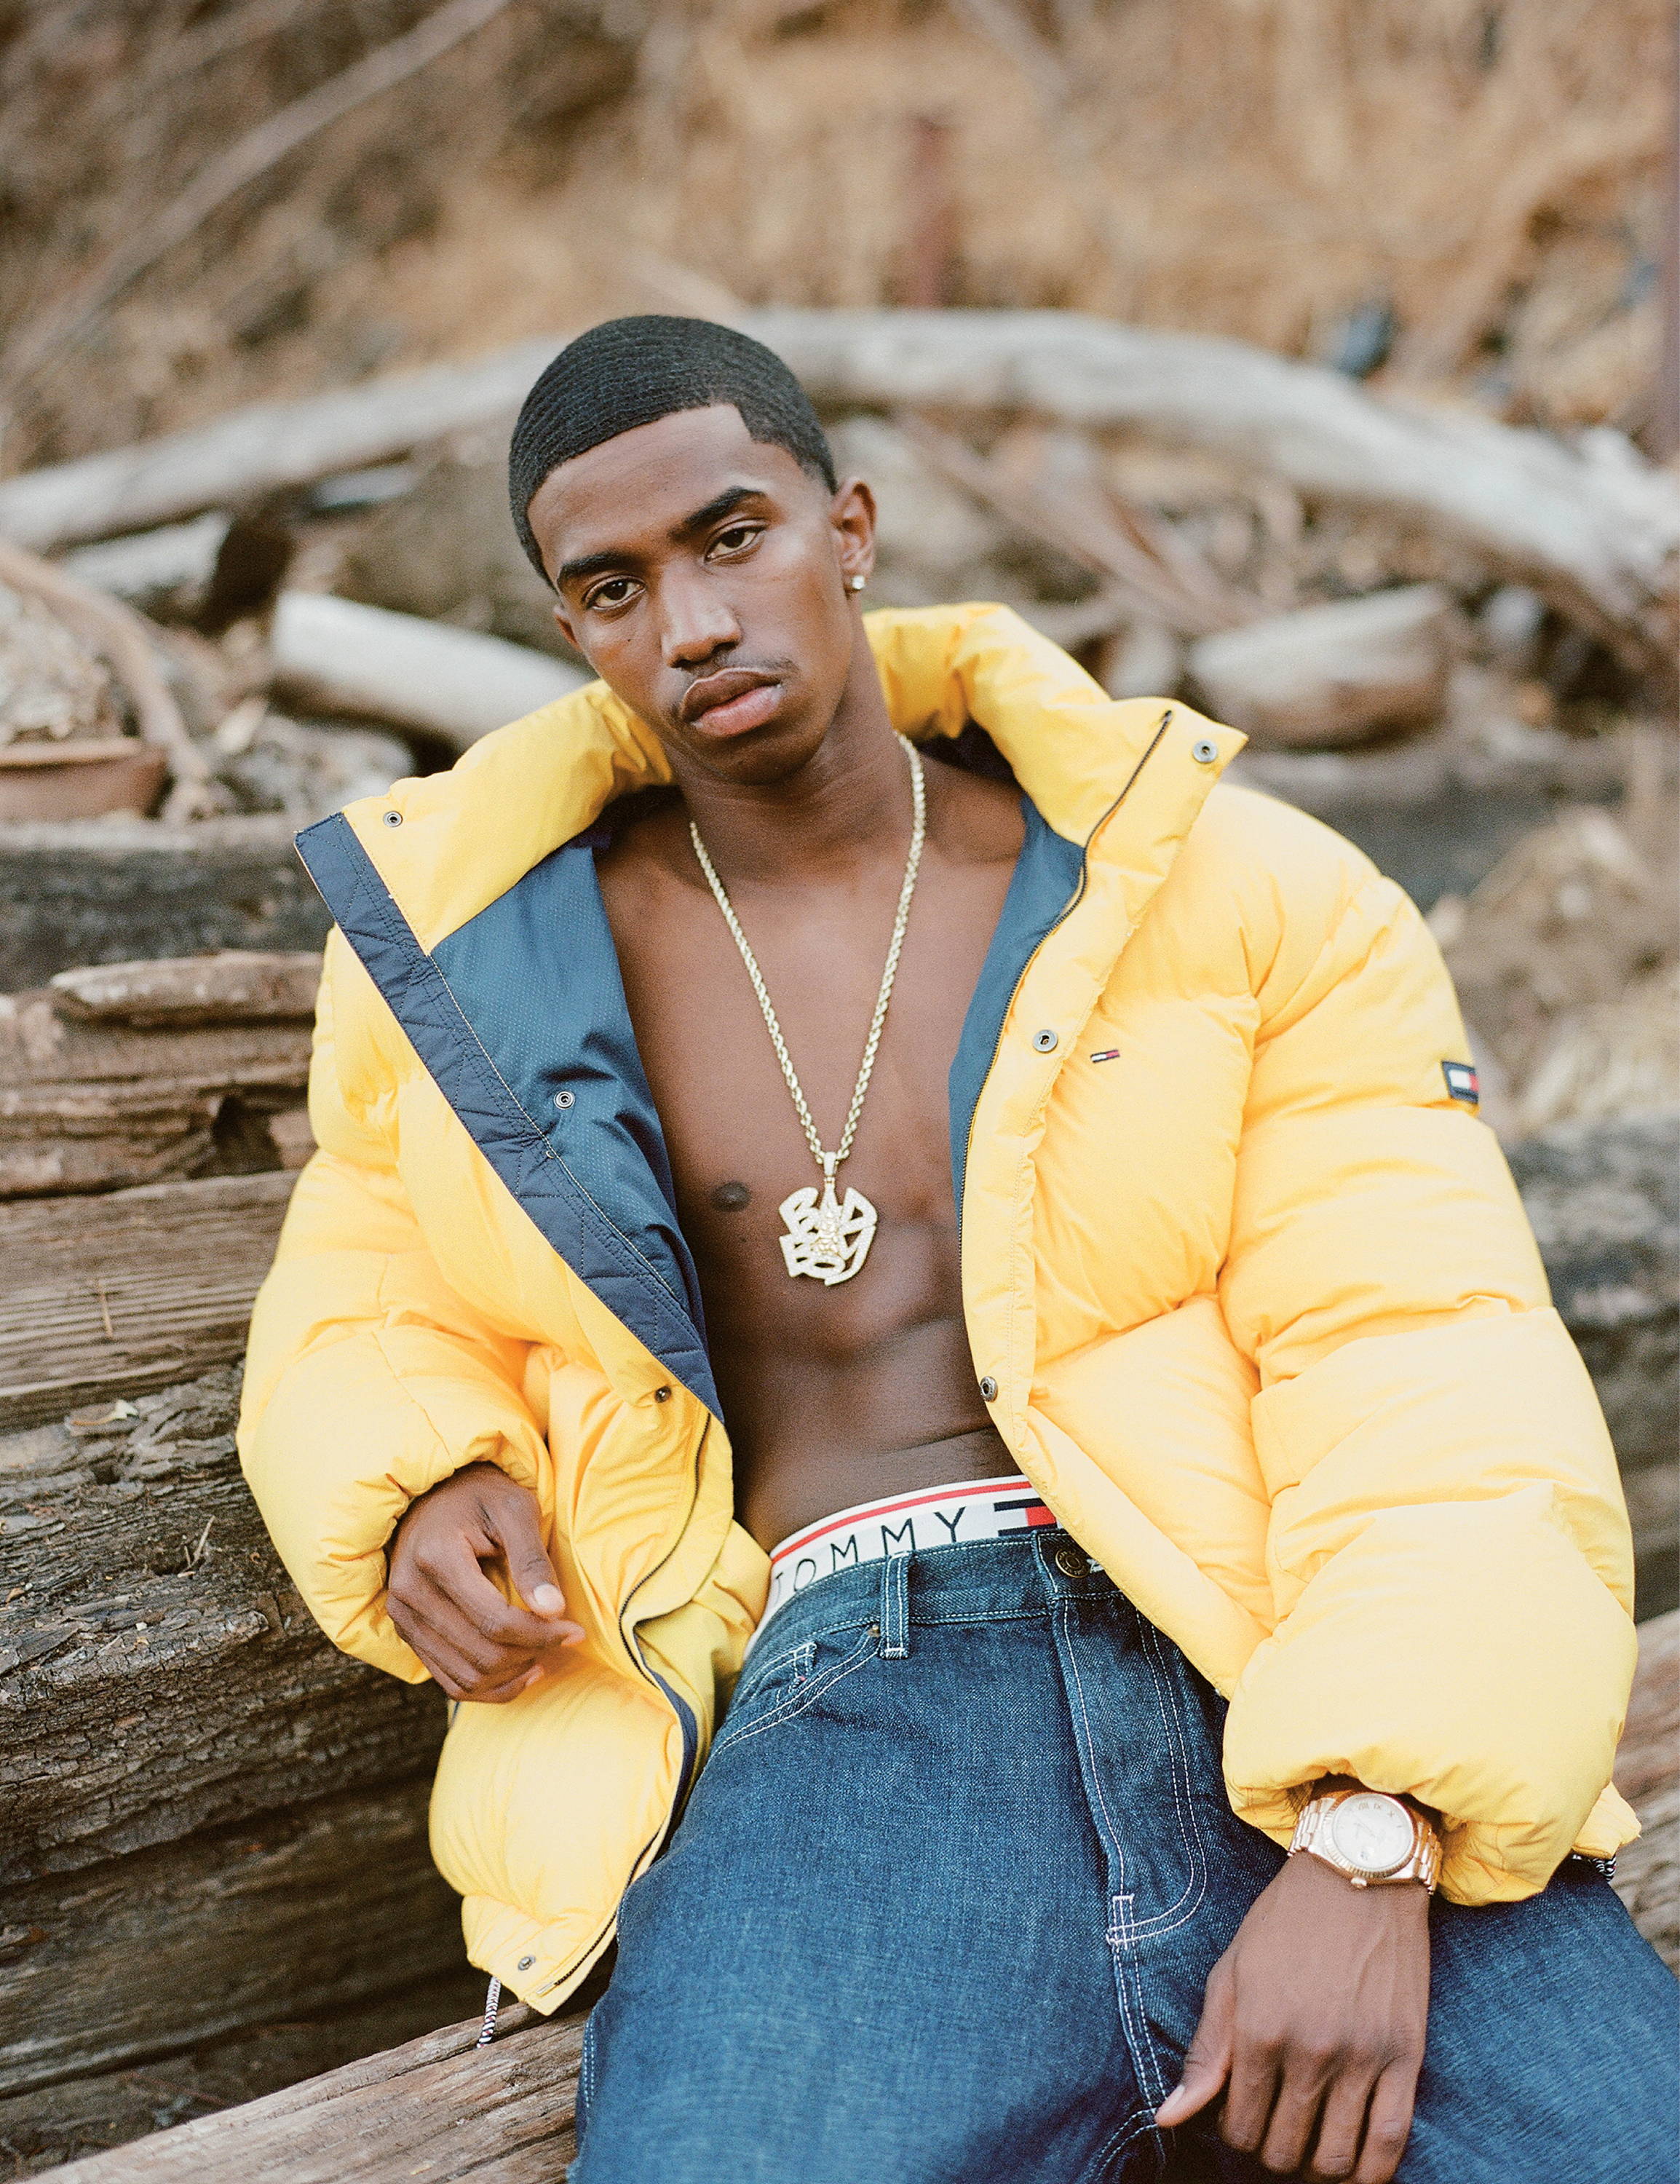 King Combs - Rollacoaster.tv